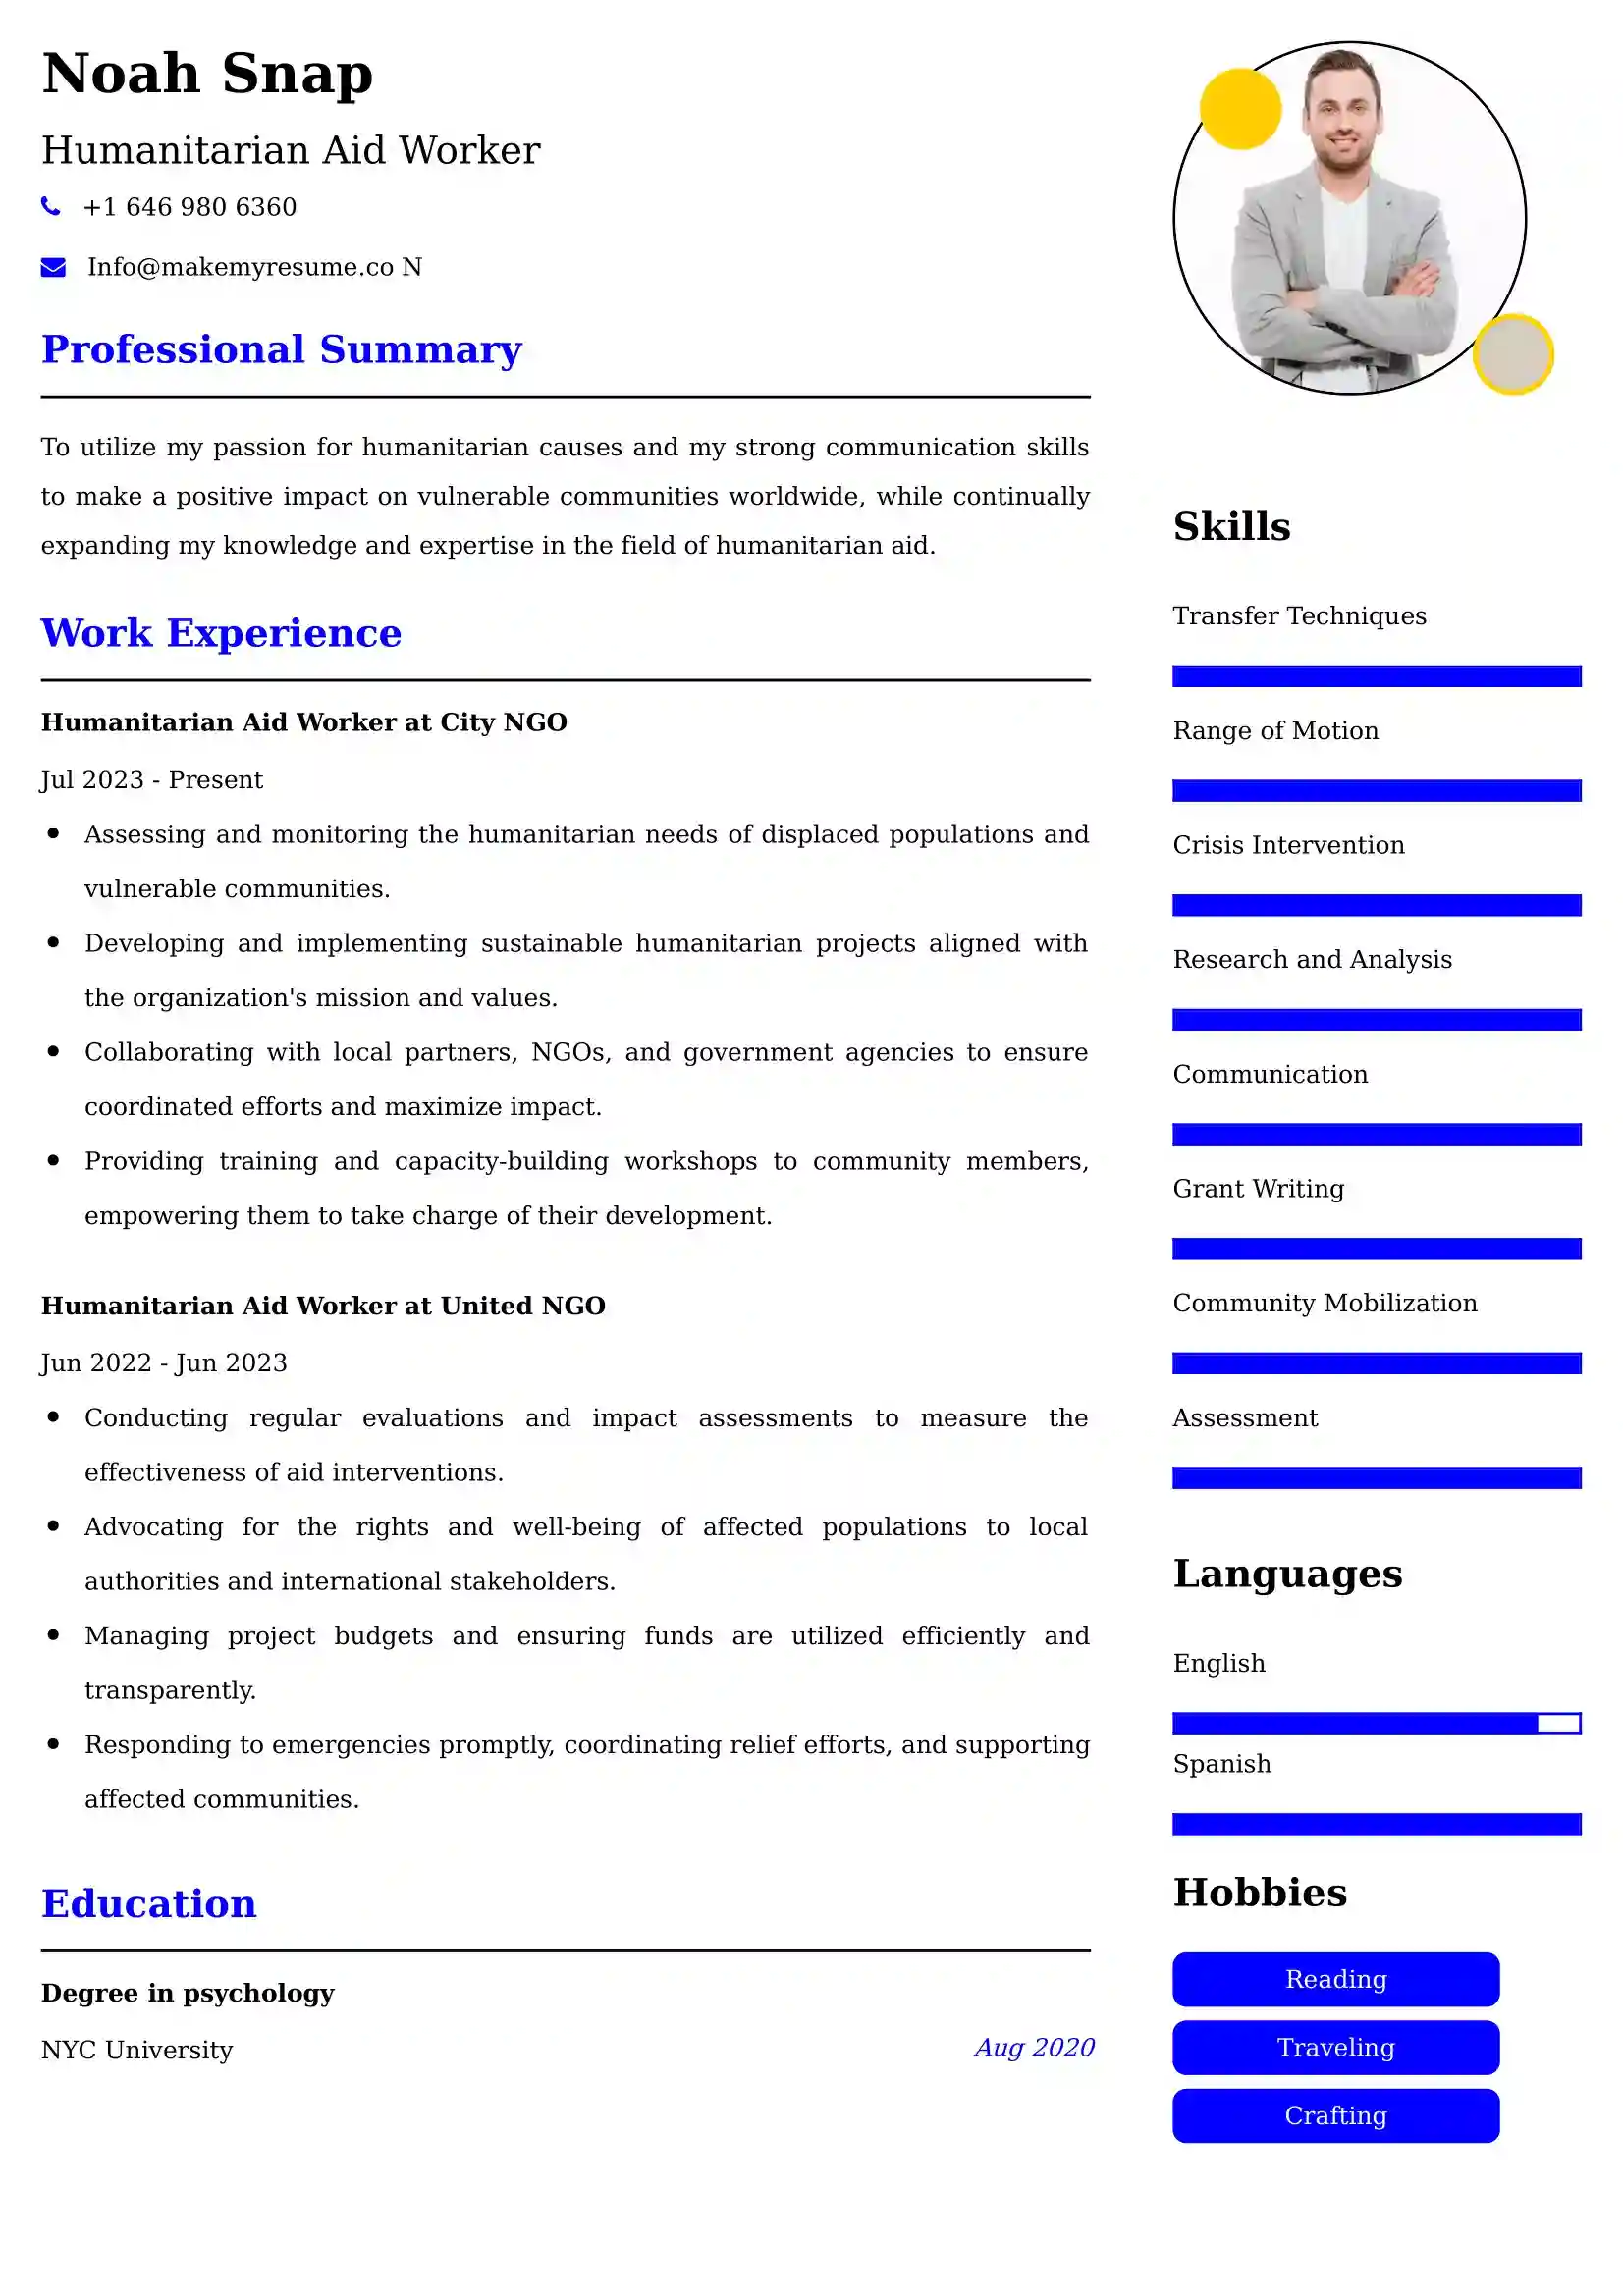 Humanitarian Aid Worker Resume Examples - UK Format, Latest Template.